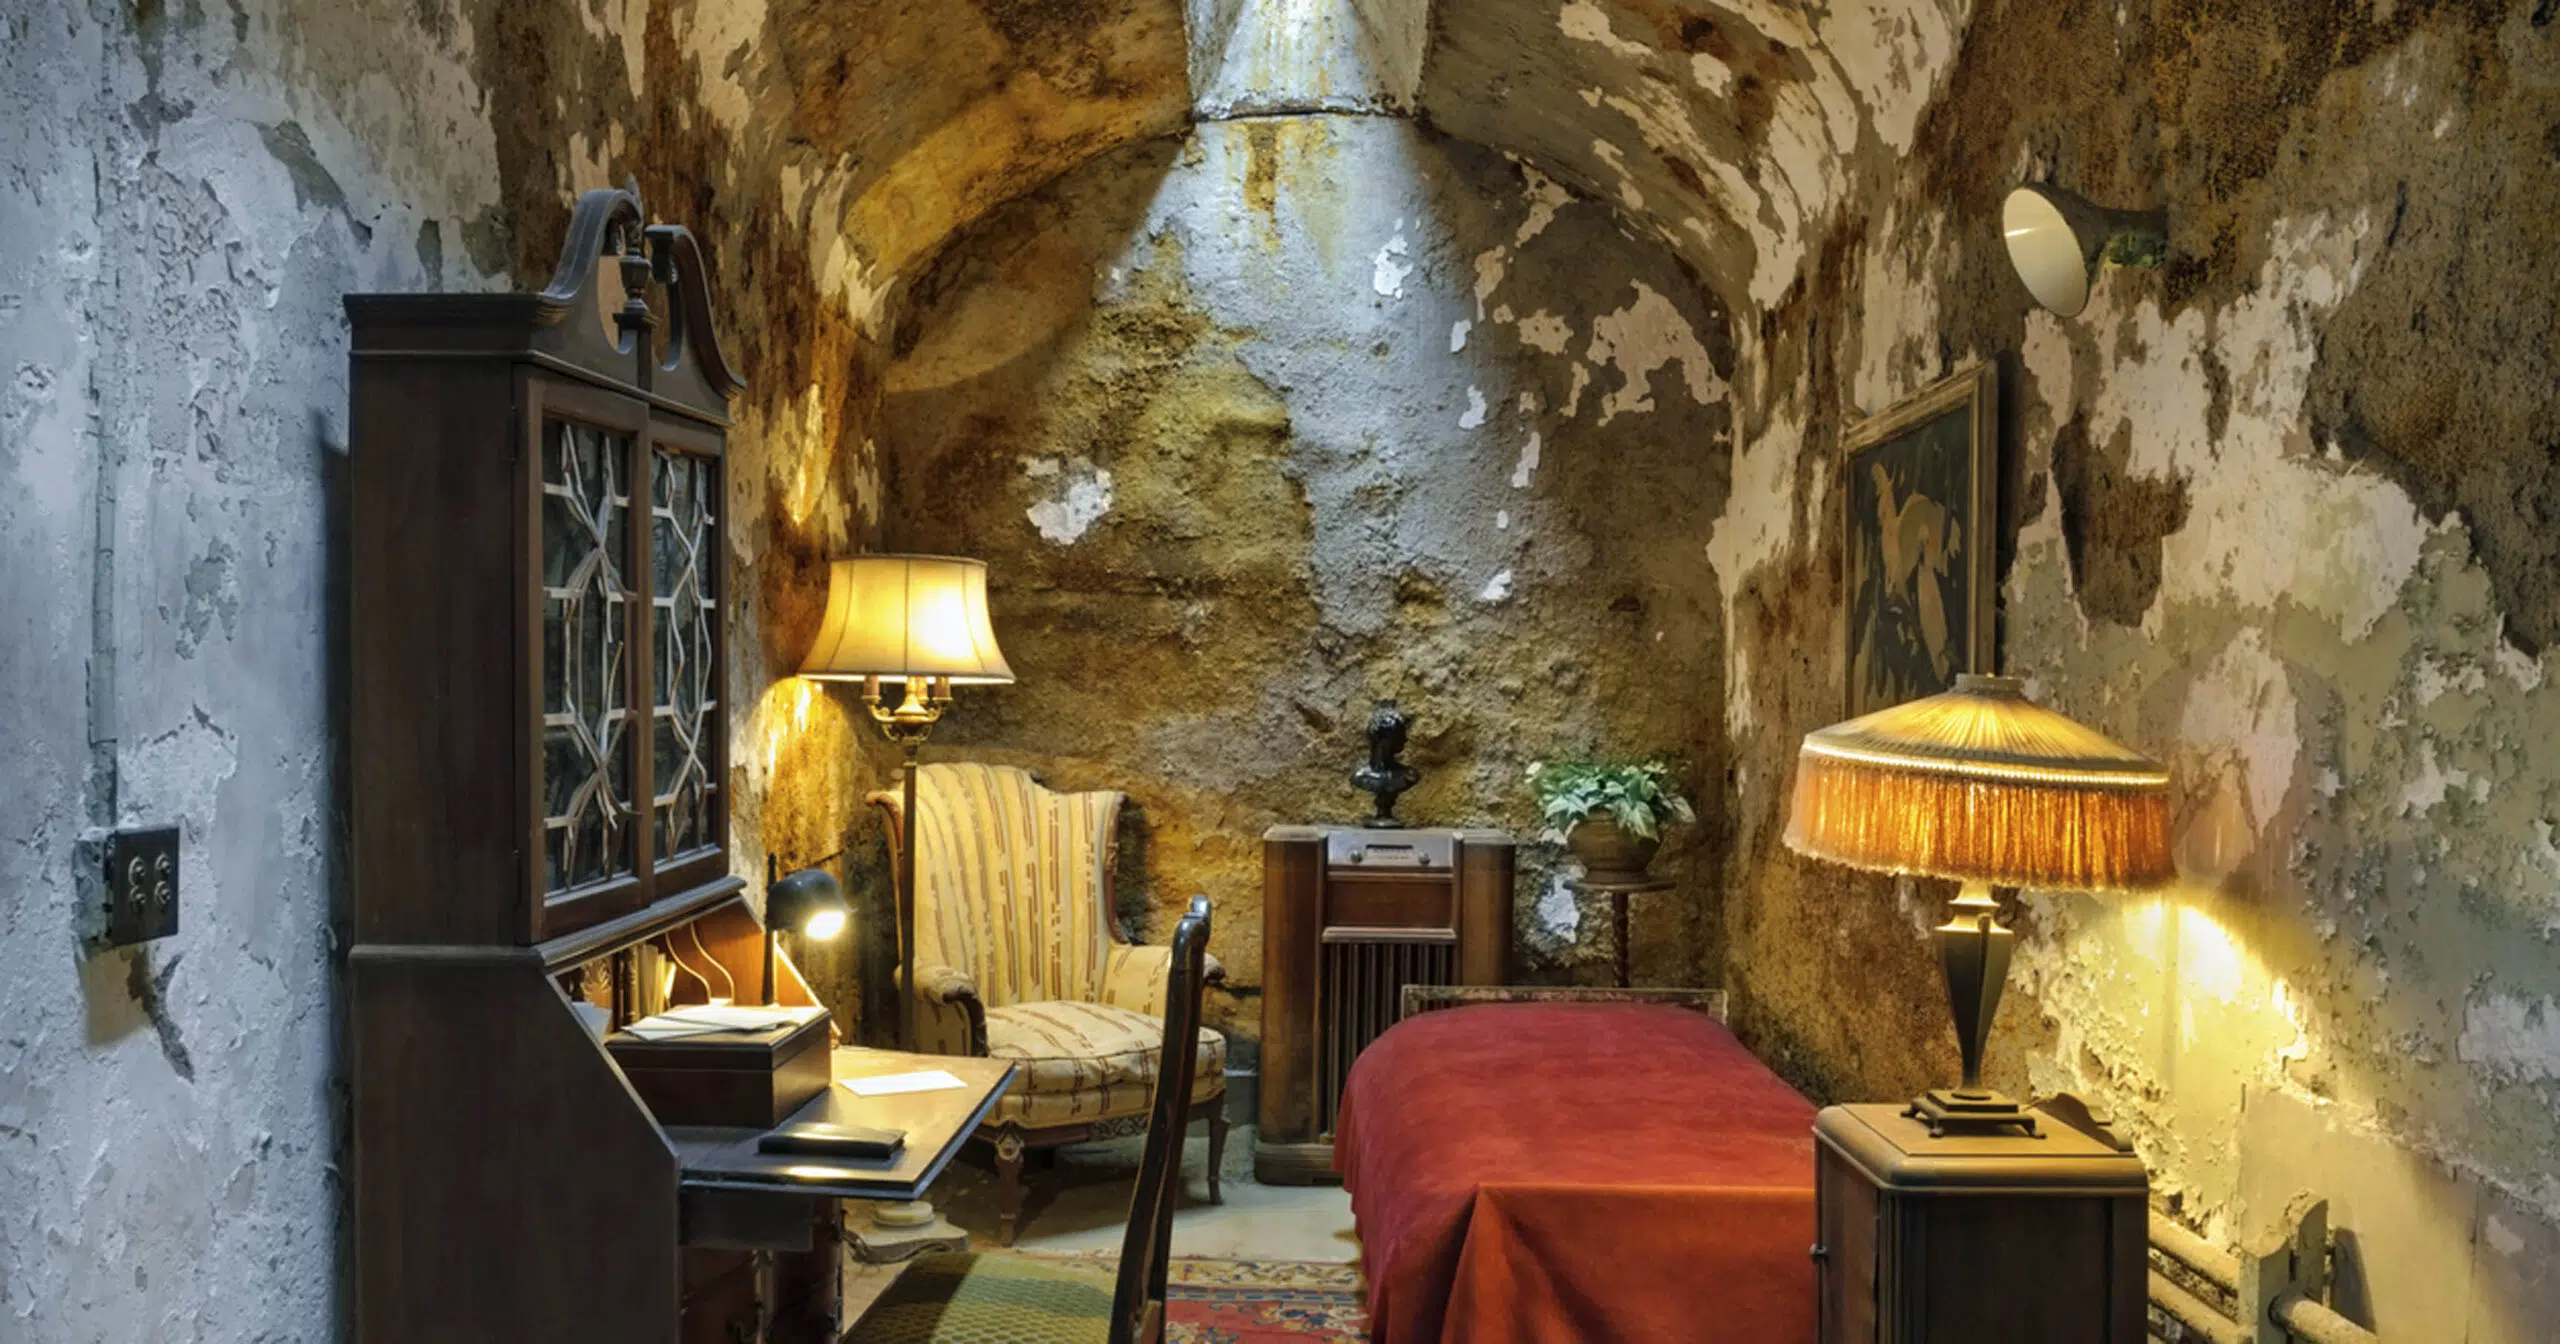 Al Capone's Prison Cell at Eastern State Penitentiary